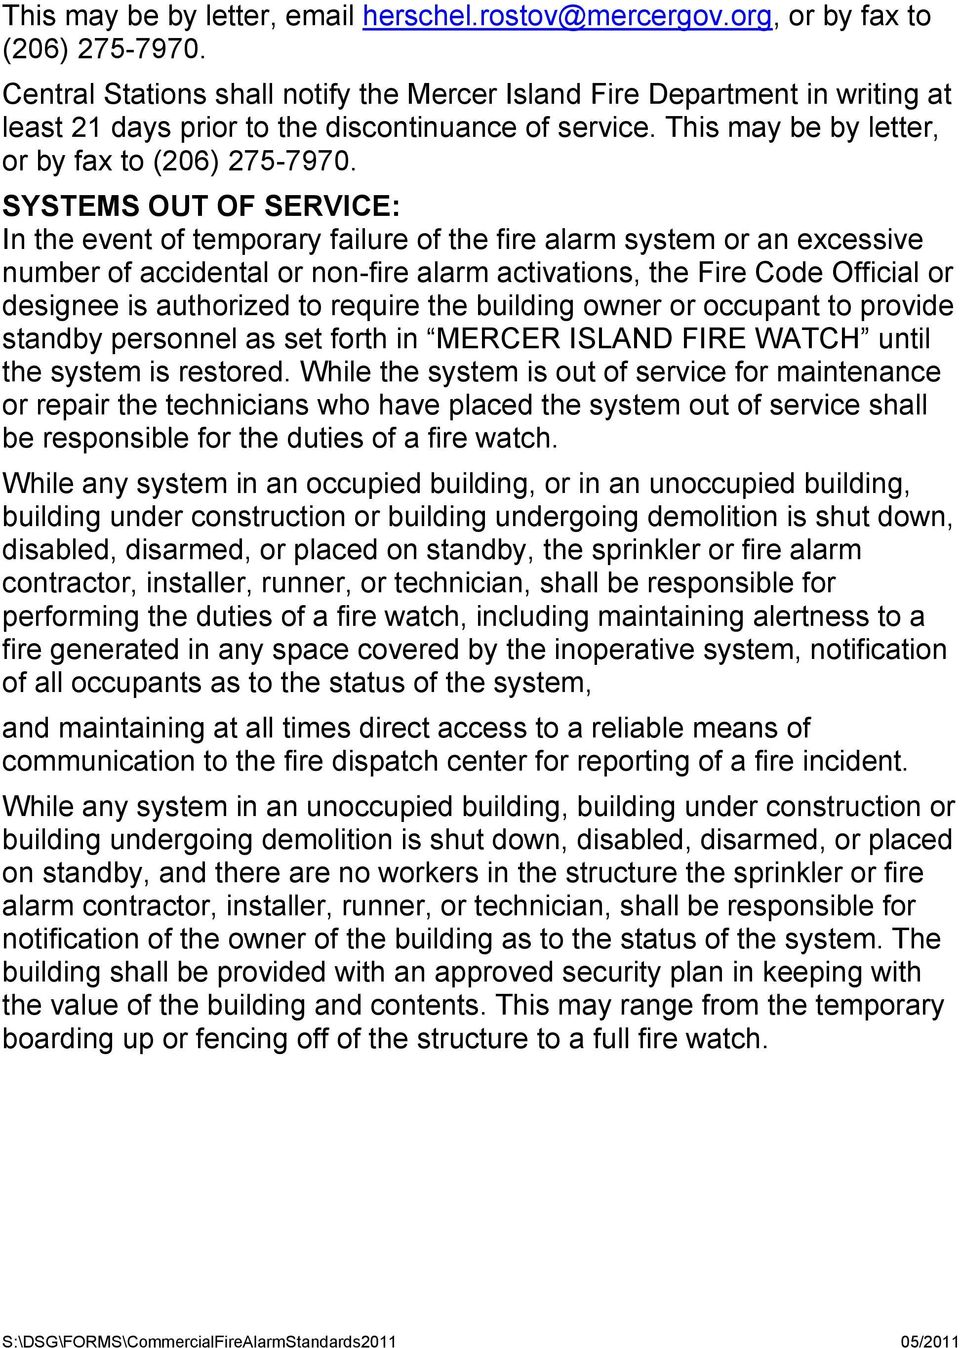 SYSTEMS OUT OF SERVICE: In the event of temporary failure of the fire alarm system or an excessive number of accidental or non-fire alarm activations, the Fire Code Official or designee is authorized